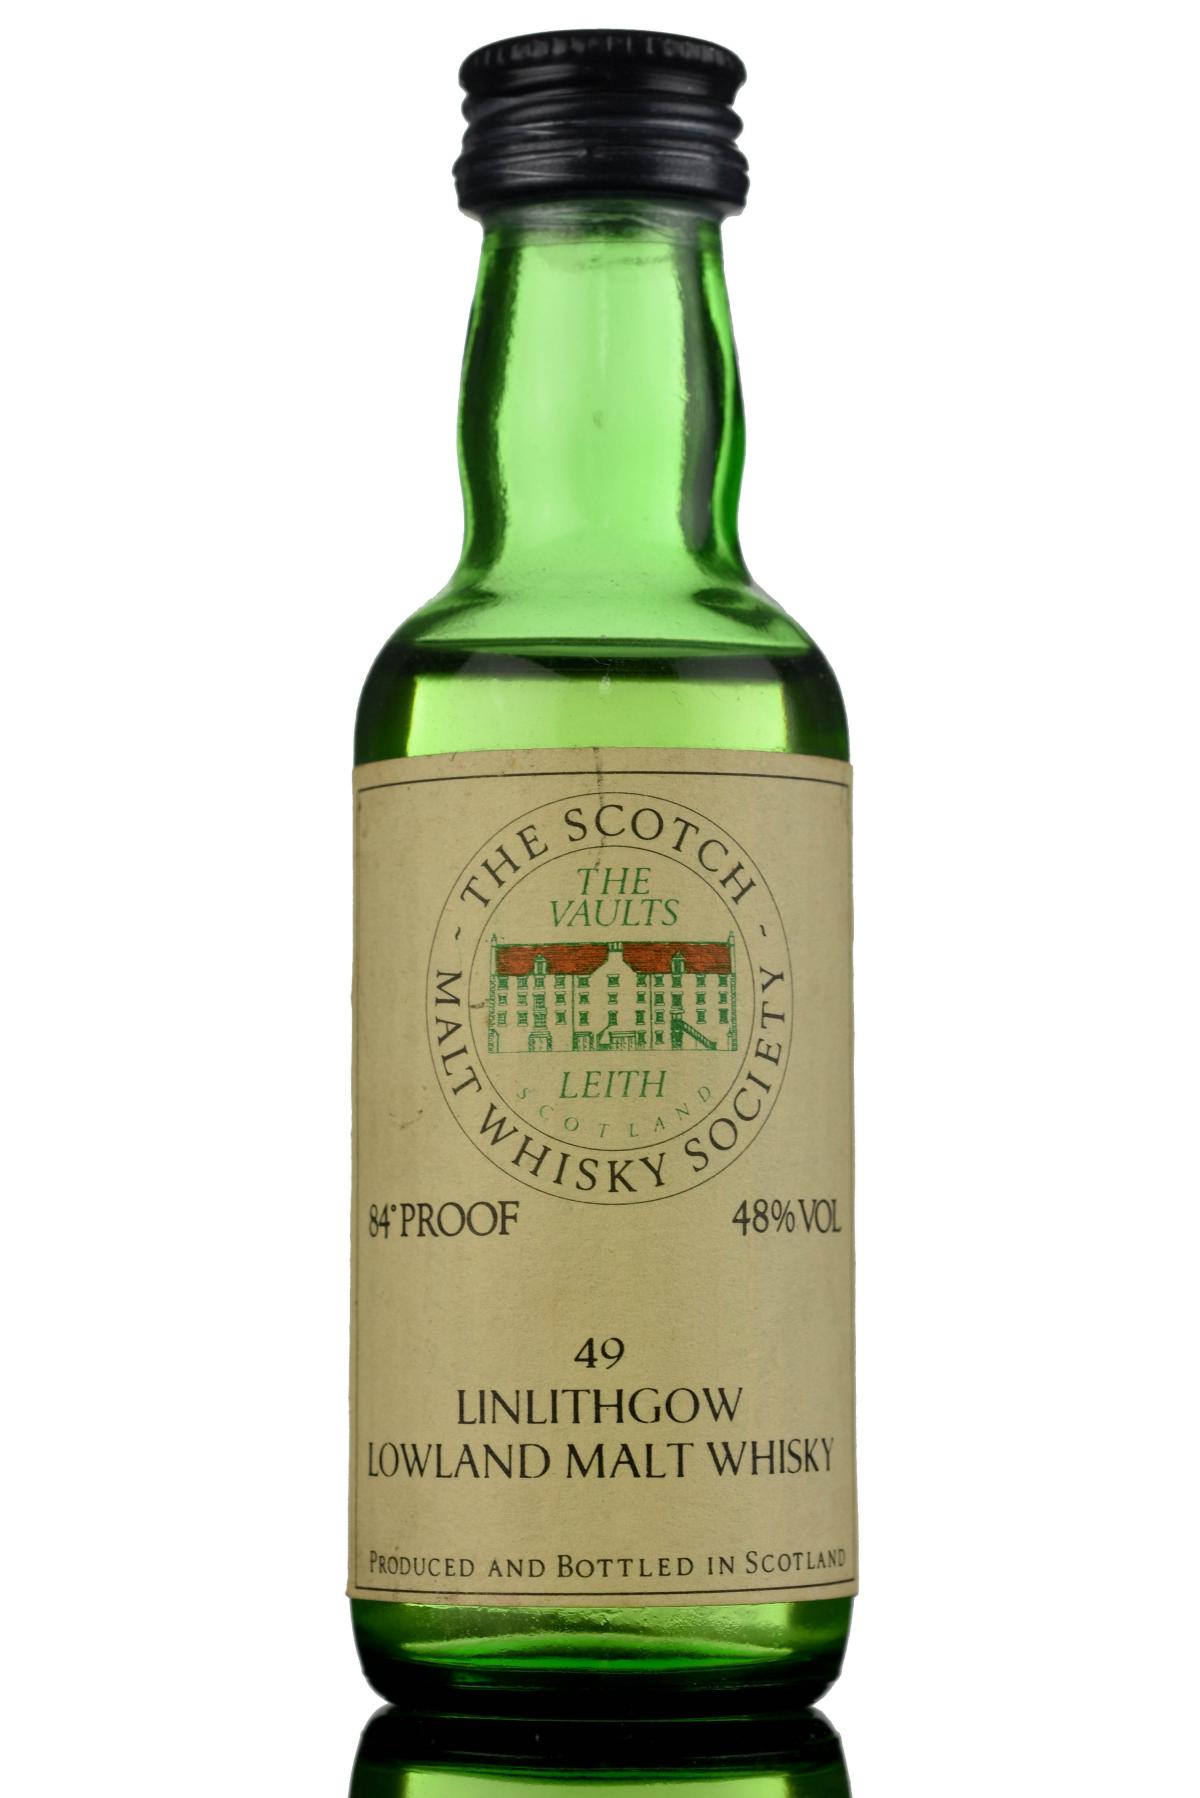 Linlithgow - SMWS 49 - Miniature